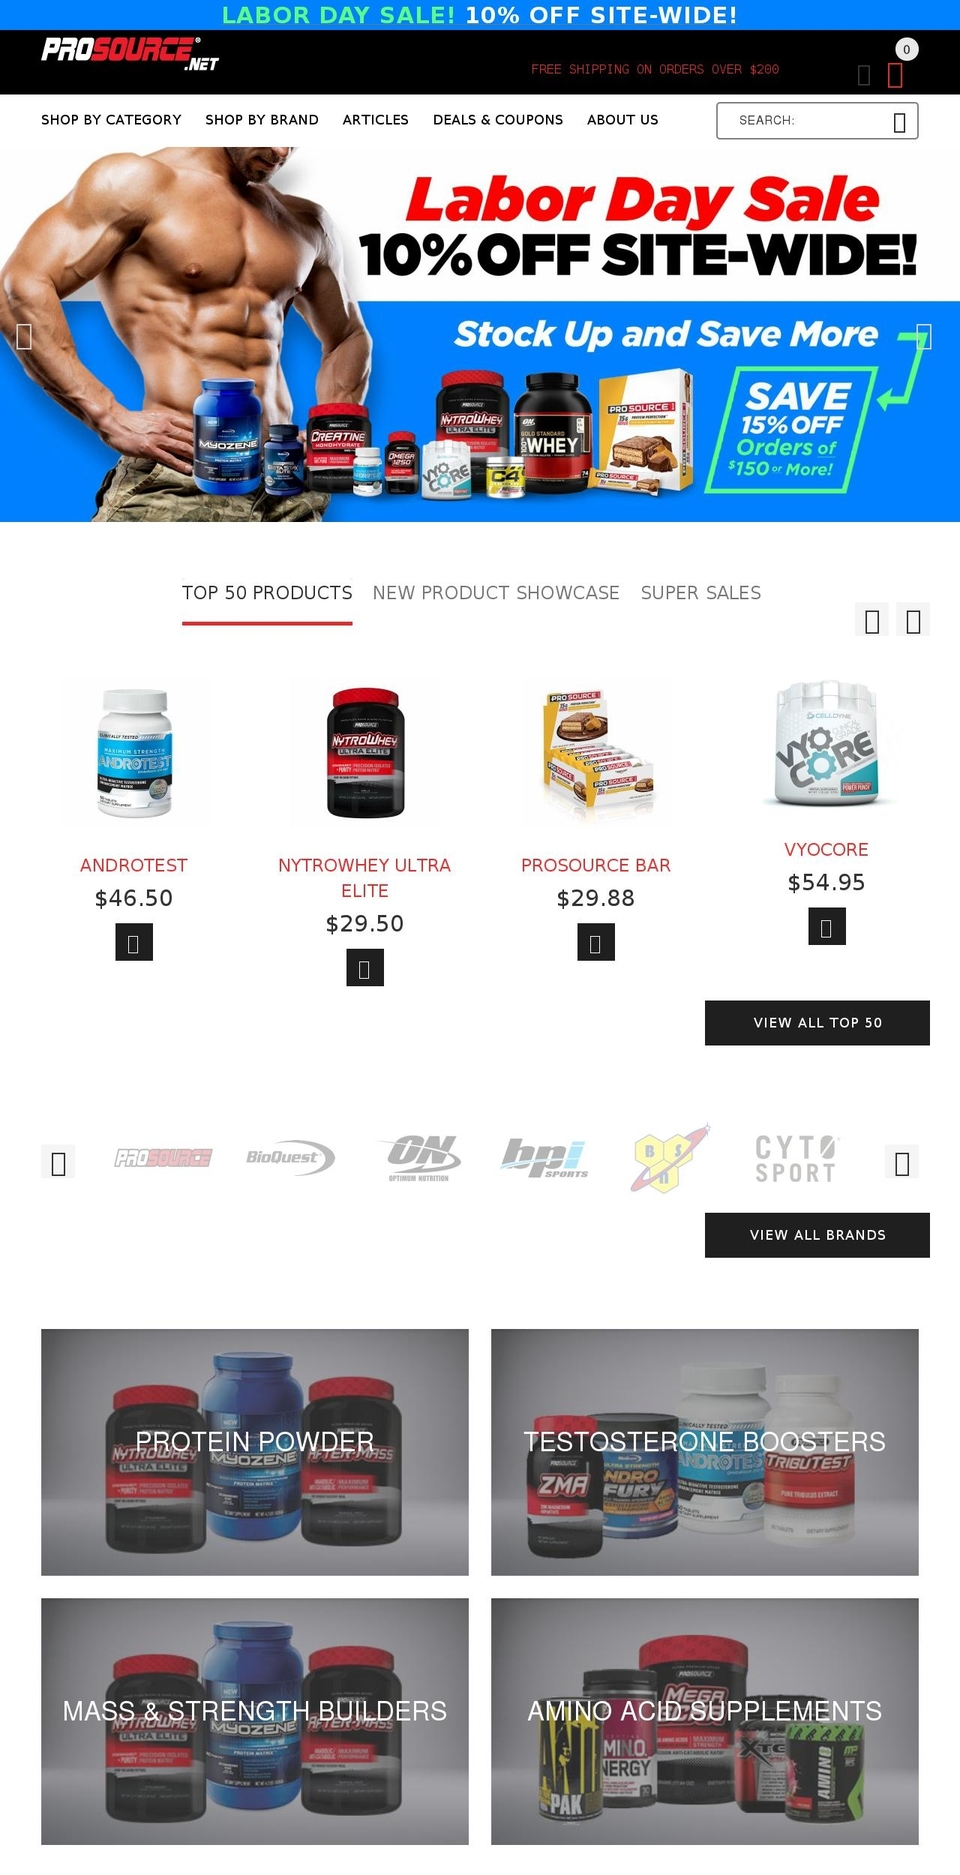 install-me-yourstore-v2-1-7 Shopify theme site example androfury.com